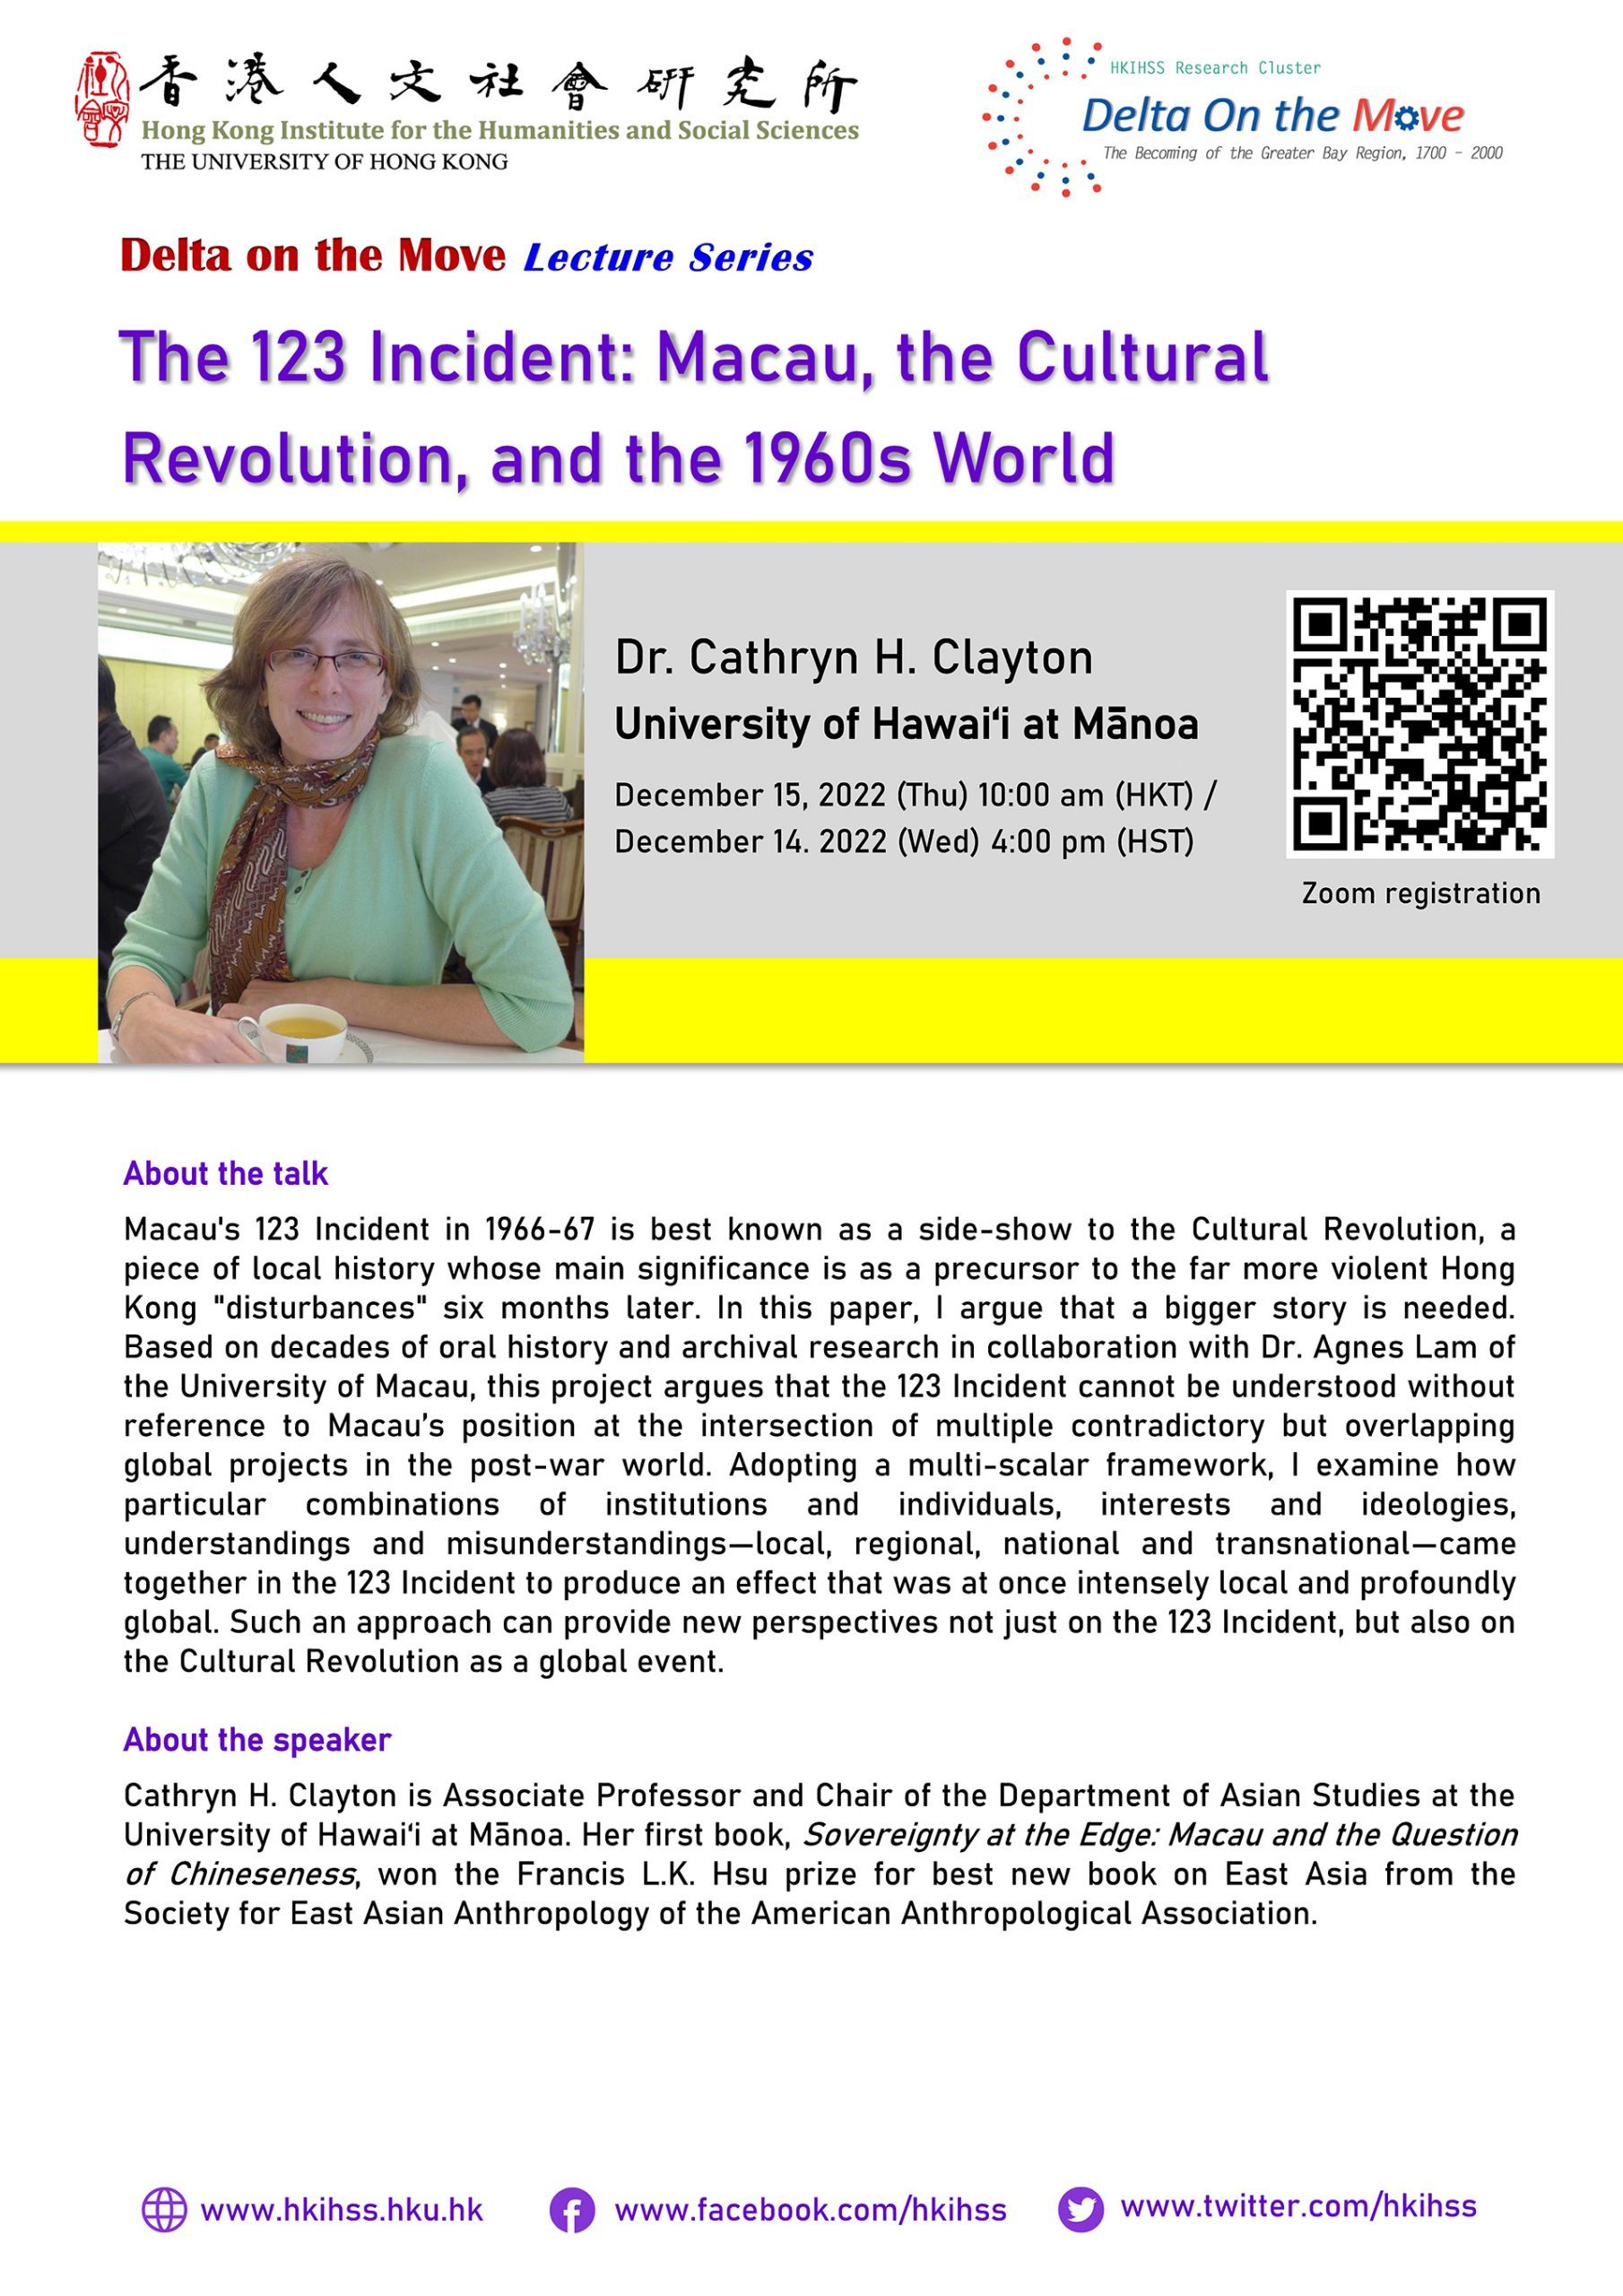 Delta on the Move Lecture Series “The 123 Incident: Macau, the Cultural Revolution, and the 1960s World